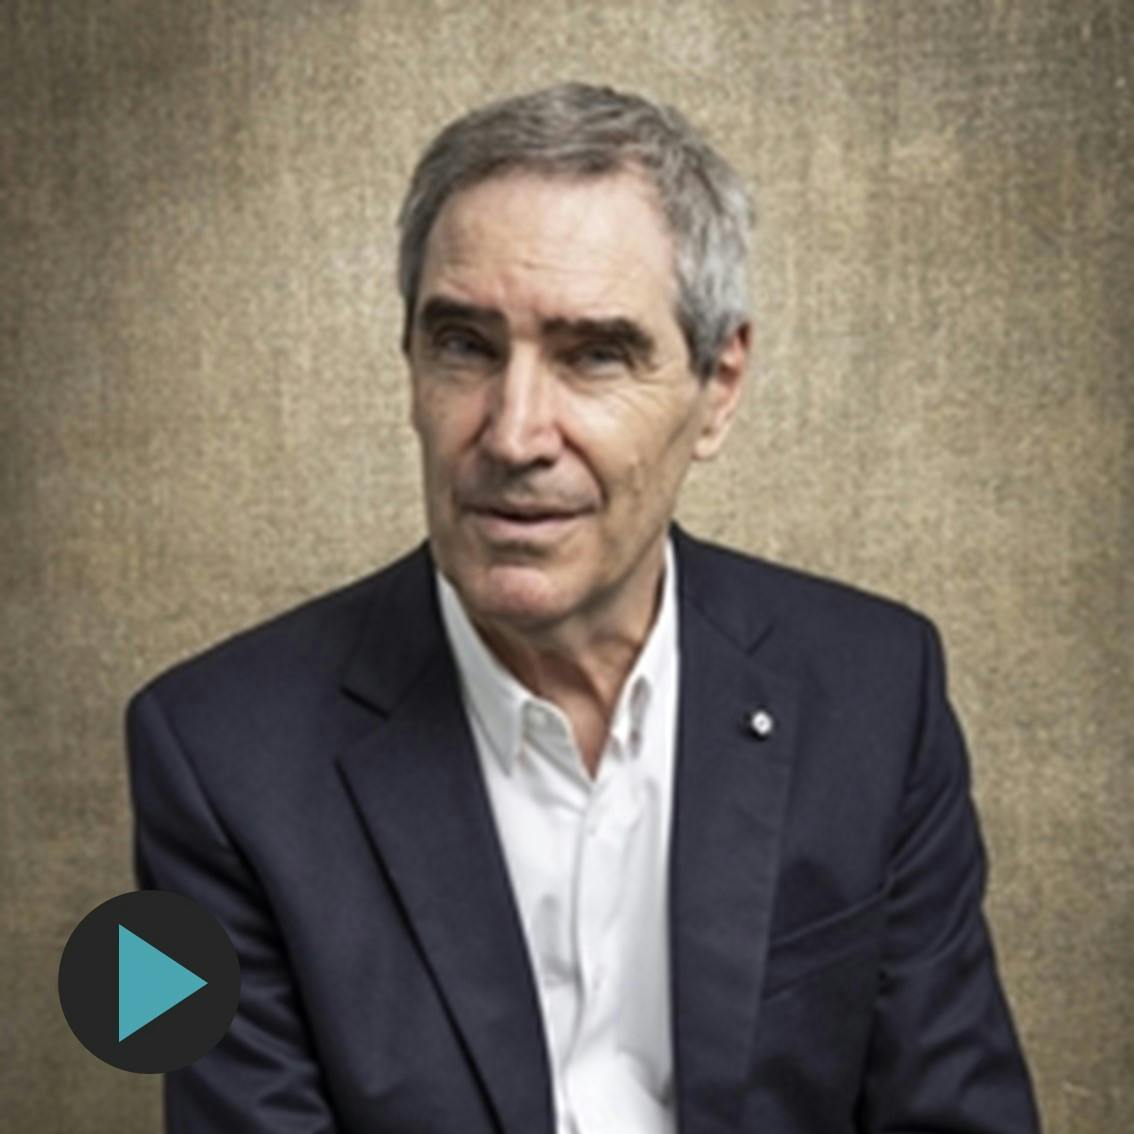 Michael Ignatieff - Finding Solace in Dark Times